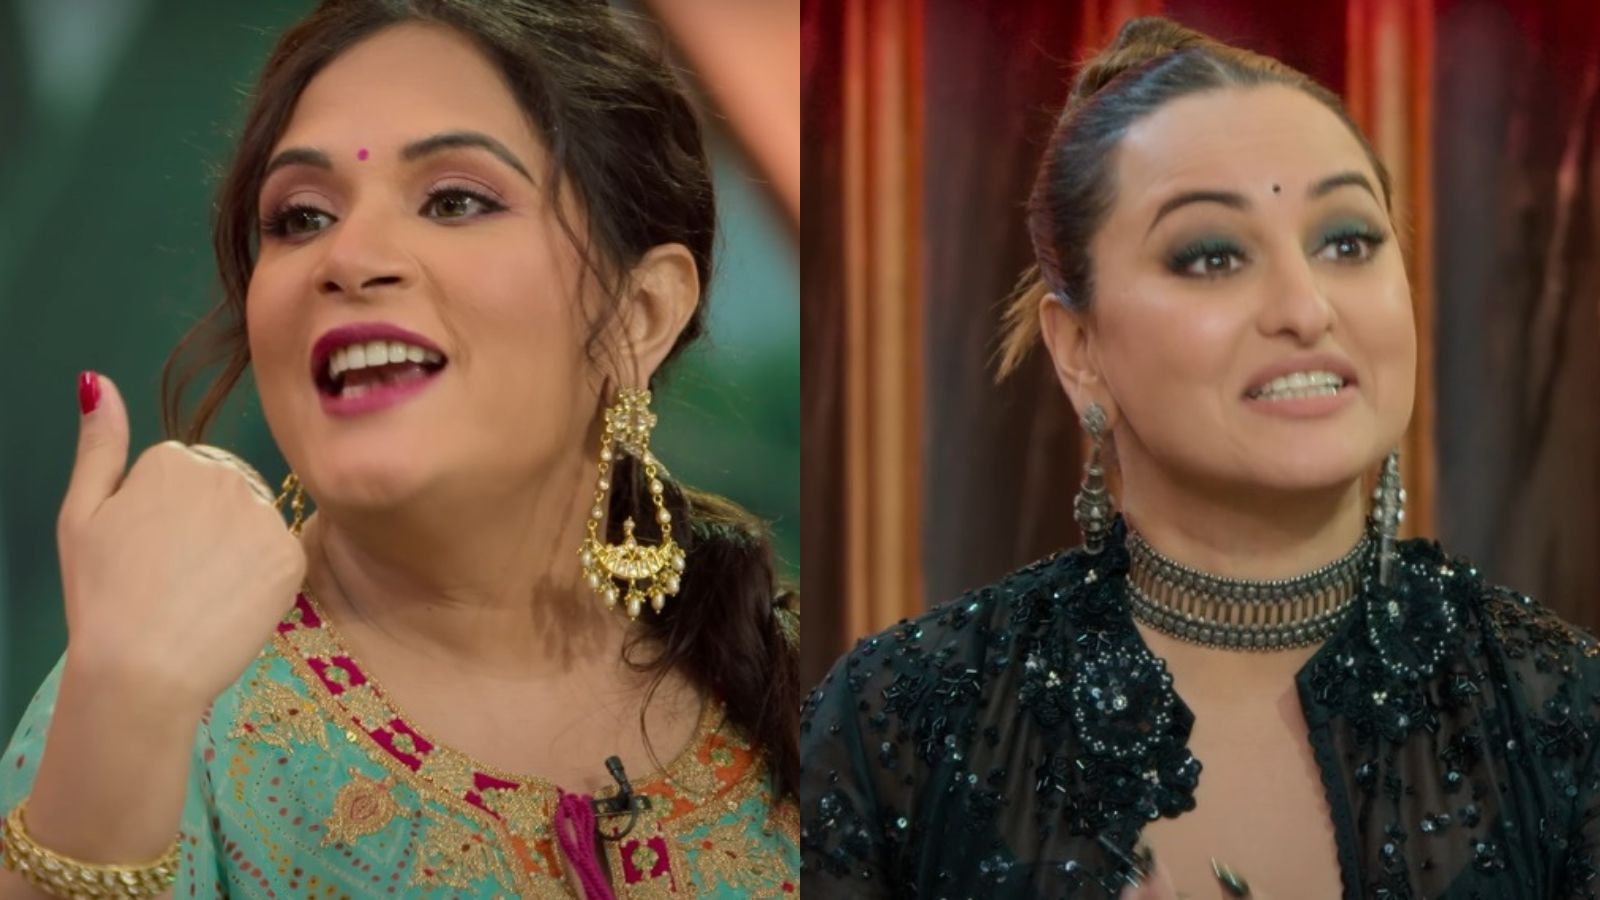 android, sonakshi sinha accepts she desperately wants to get married, as kapil sharma asks her plans now kiara advani, alia bhatt have tied the knot: ‘kyu jale pe…’